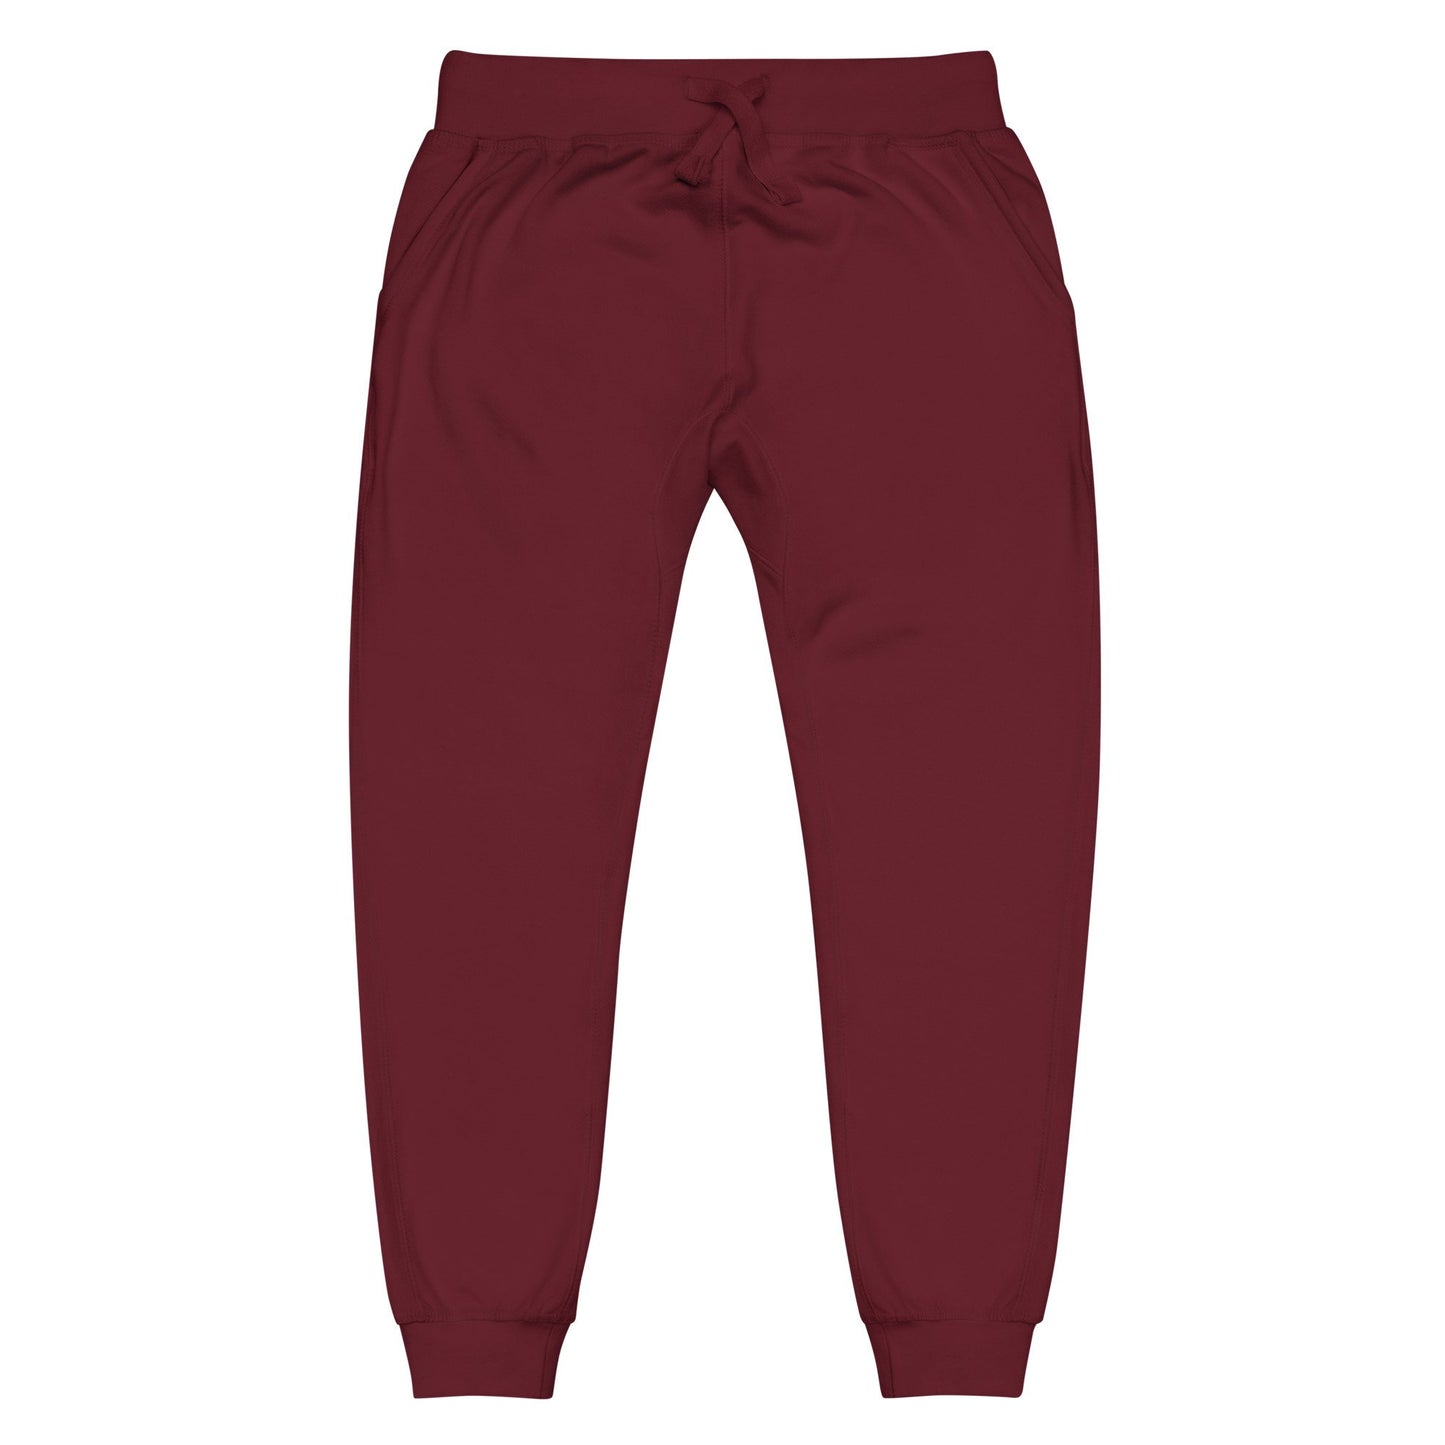 THRIVING IN CHAOS (MAROON RED SWEATS)